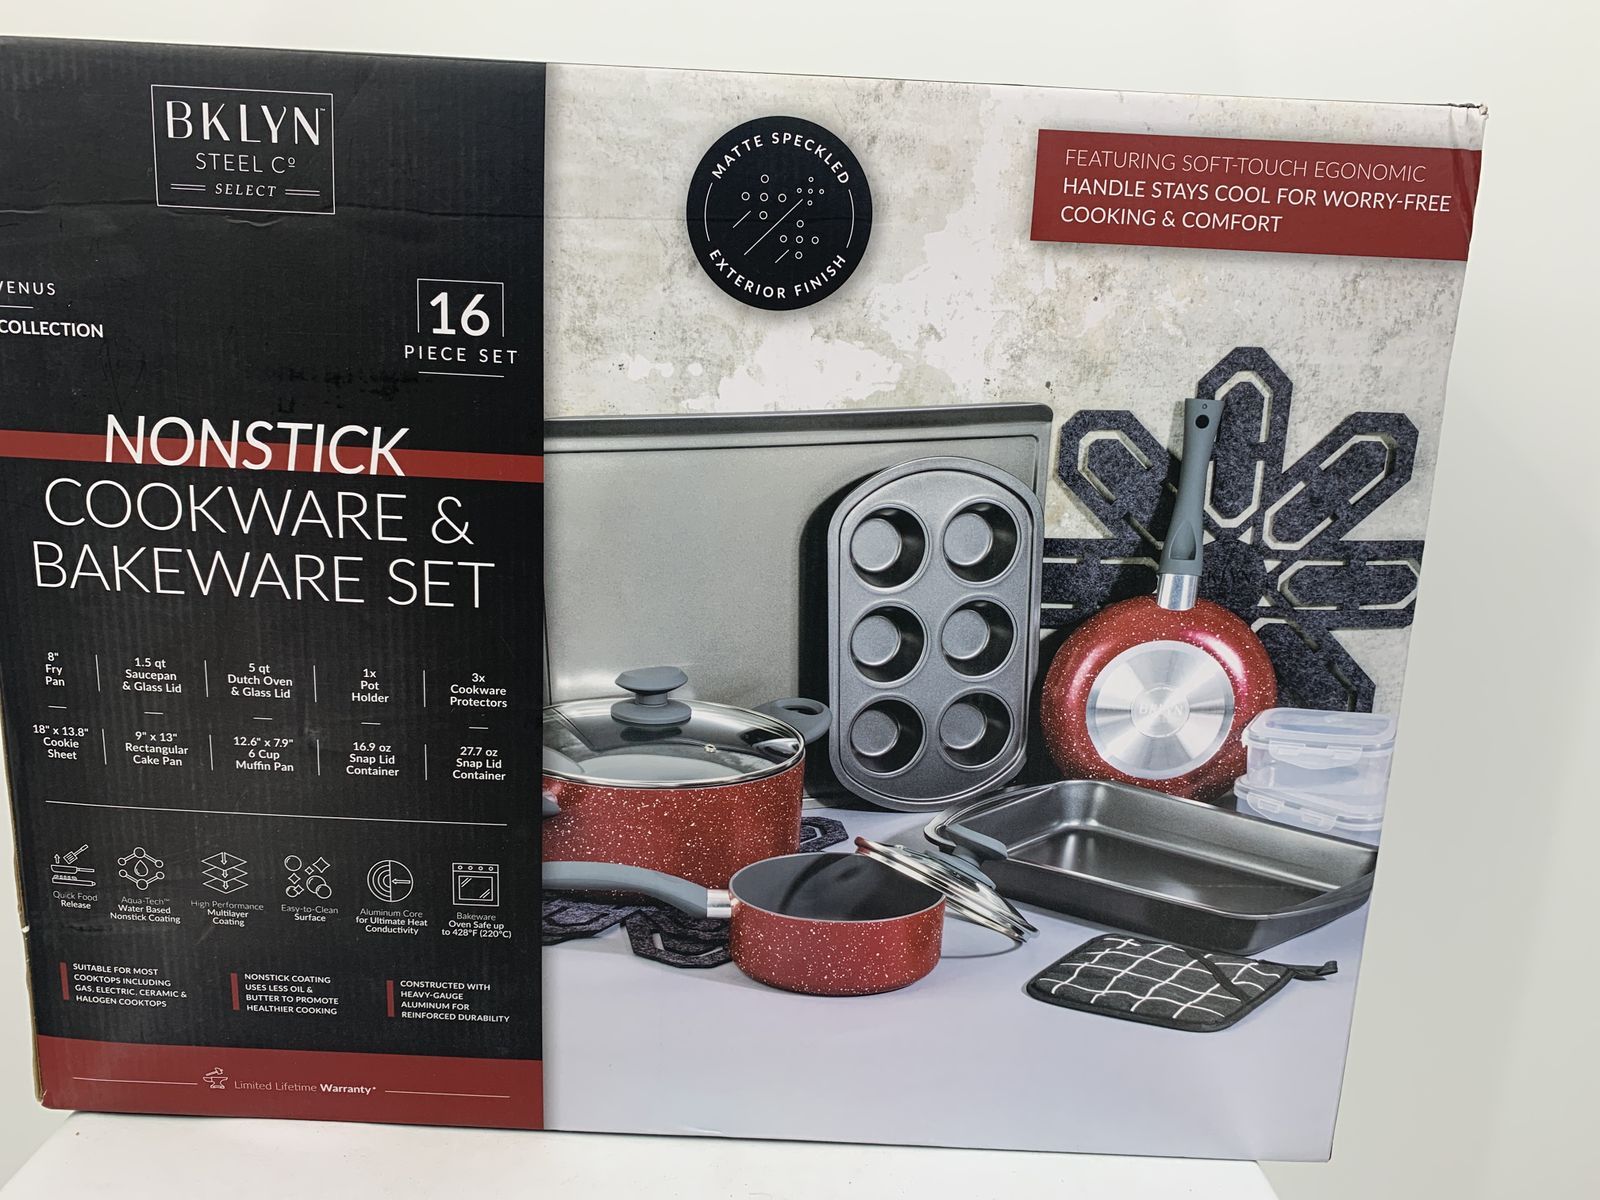 Venus Collection Bklyn Steel Co Red 16 Piece Nonstick Cookware